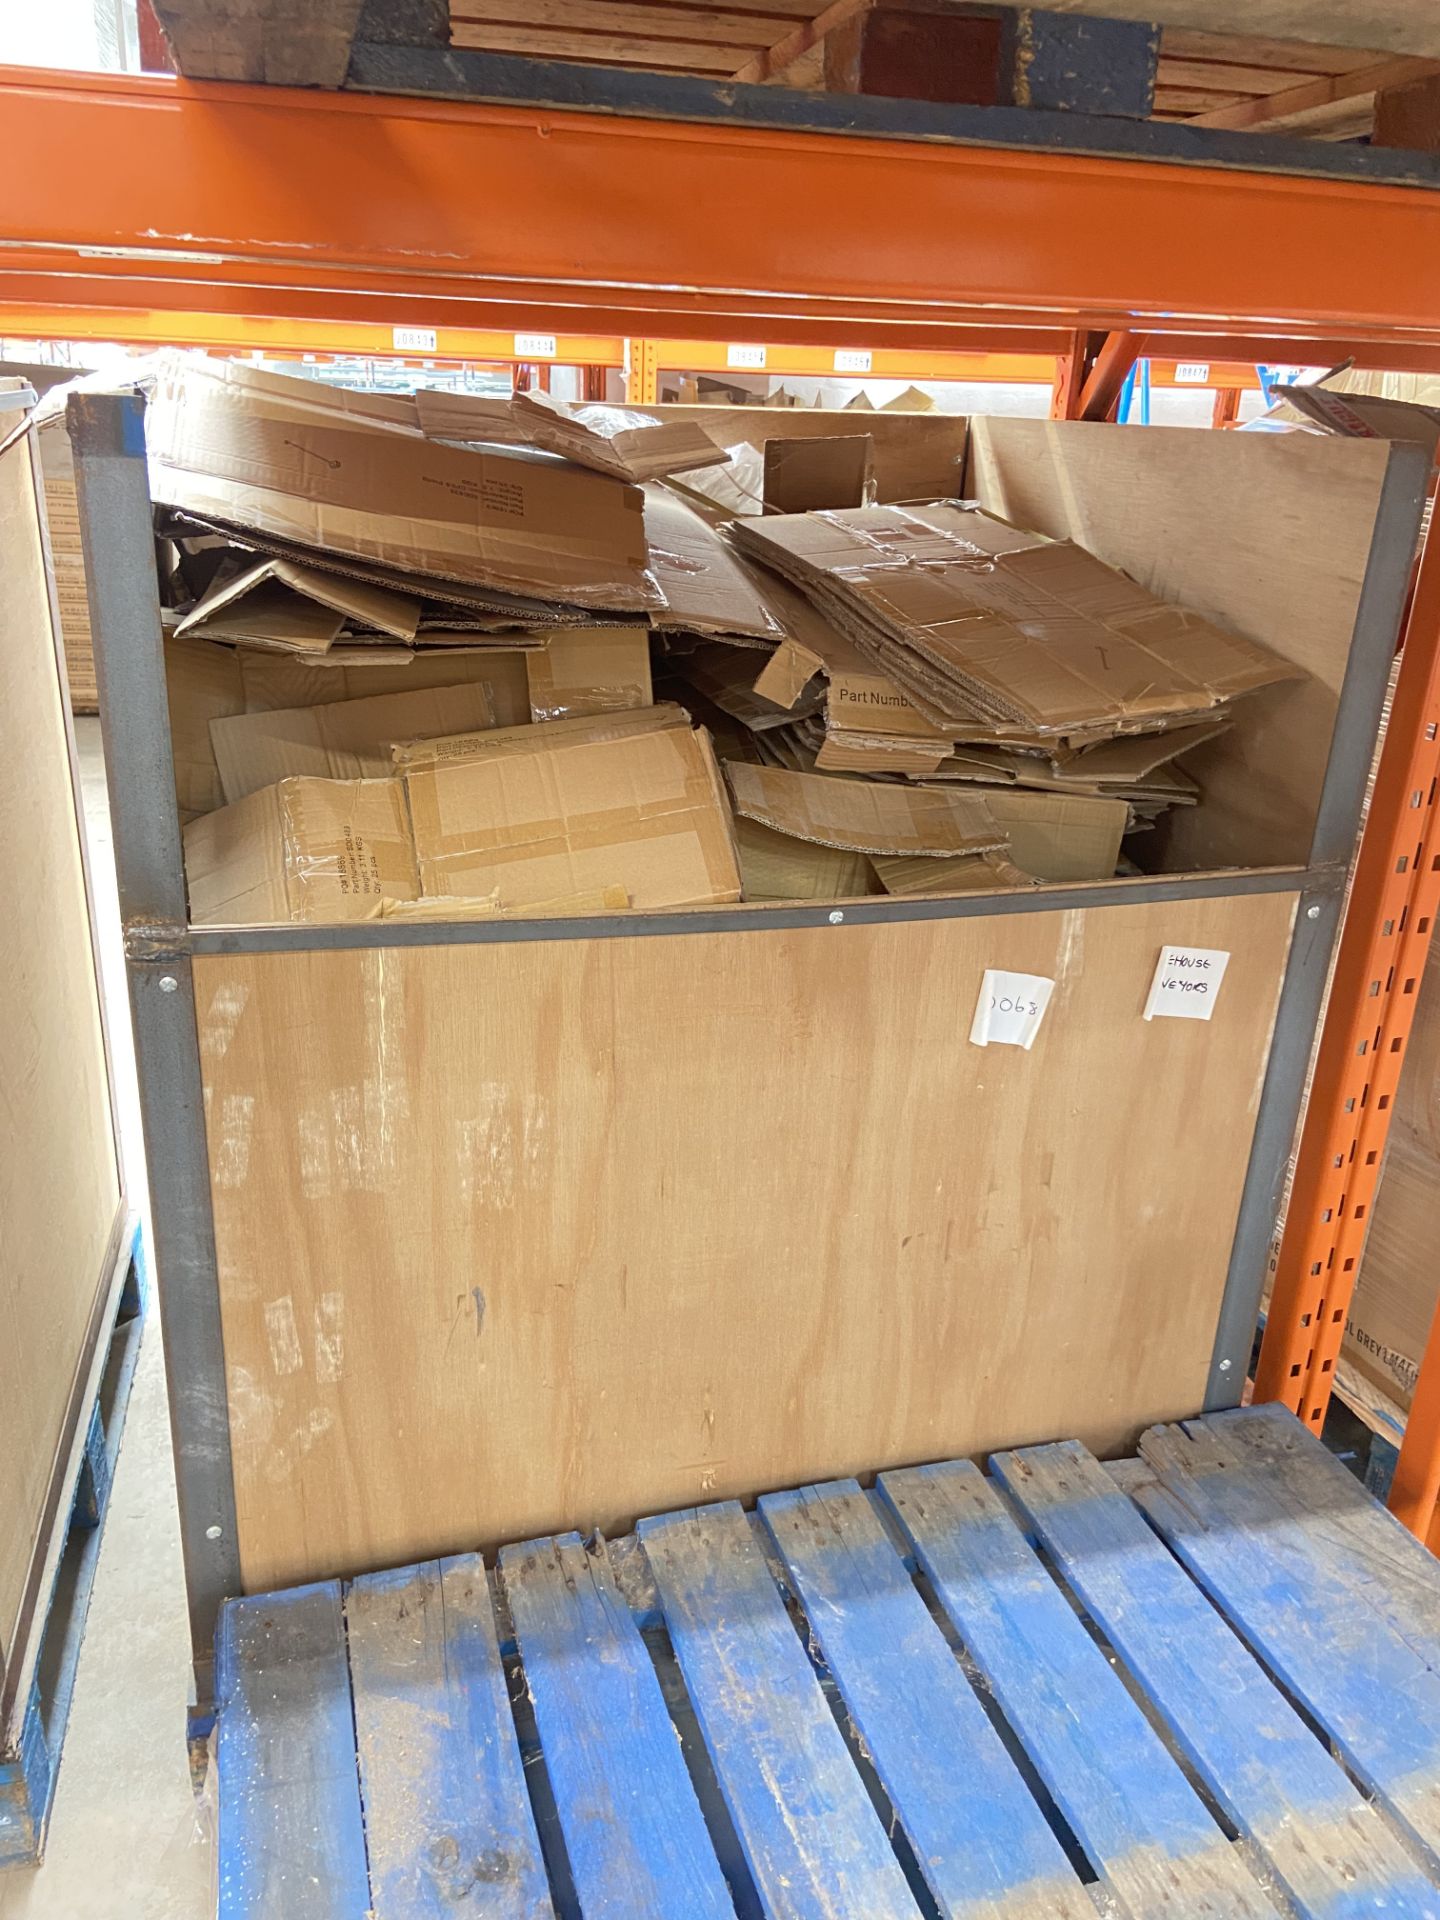 Steel Framed Packing Box, with contents of empty cardboard boxes (J0795), Lot located 33-37 Carron - Image 2 of 2